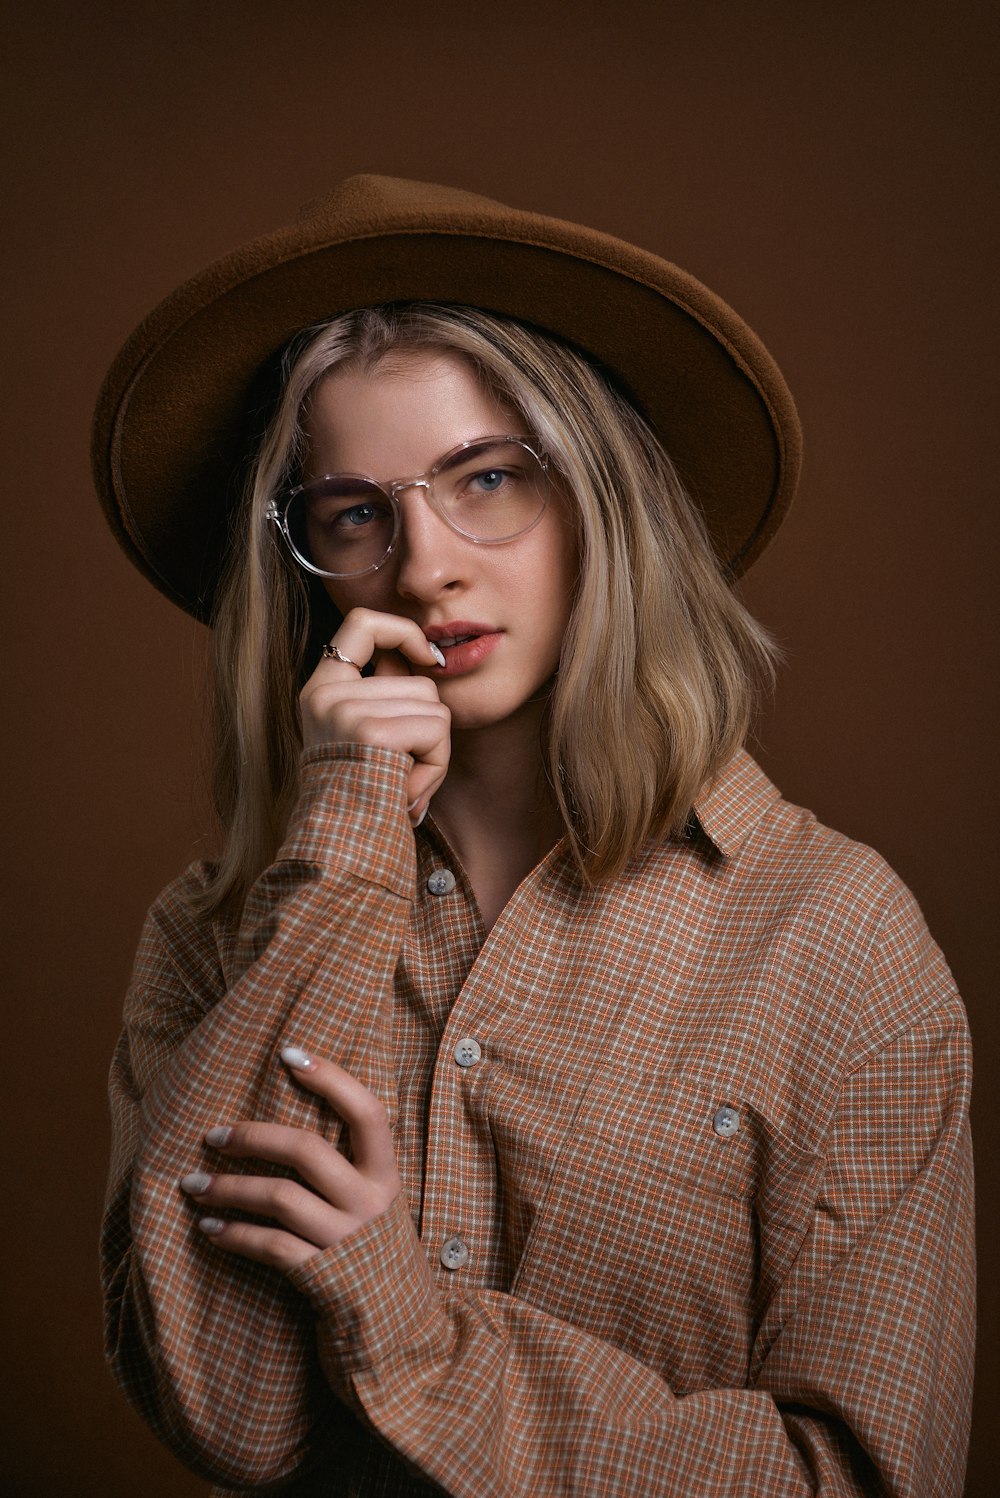 a woman wearing glasses and a hat poses for a picture